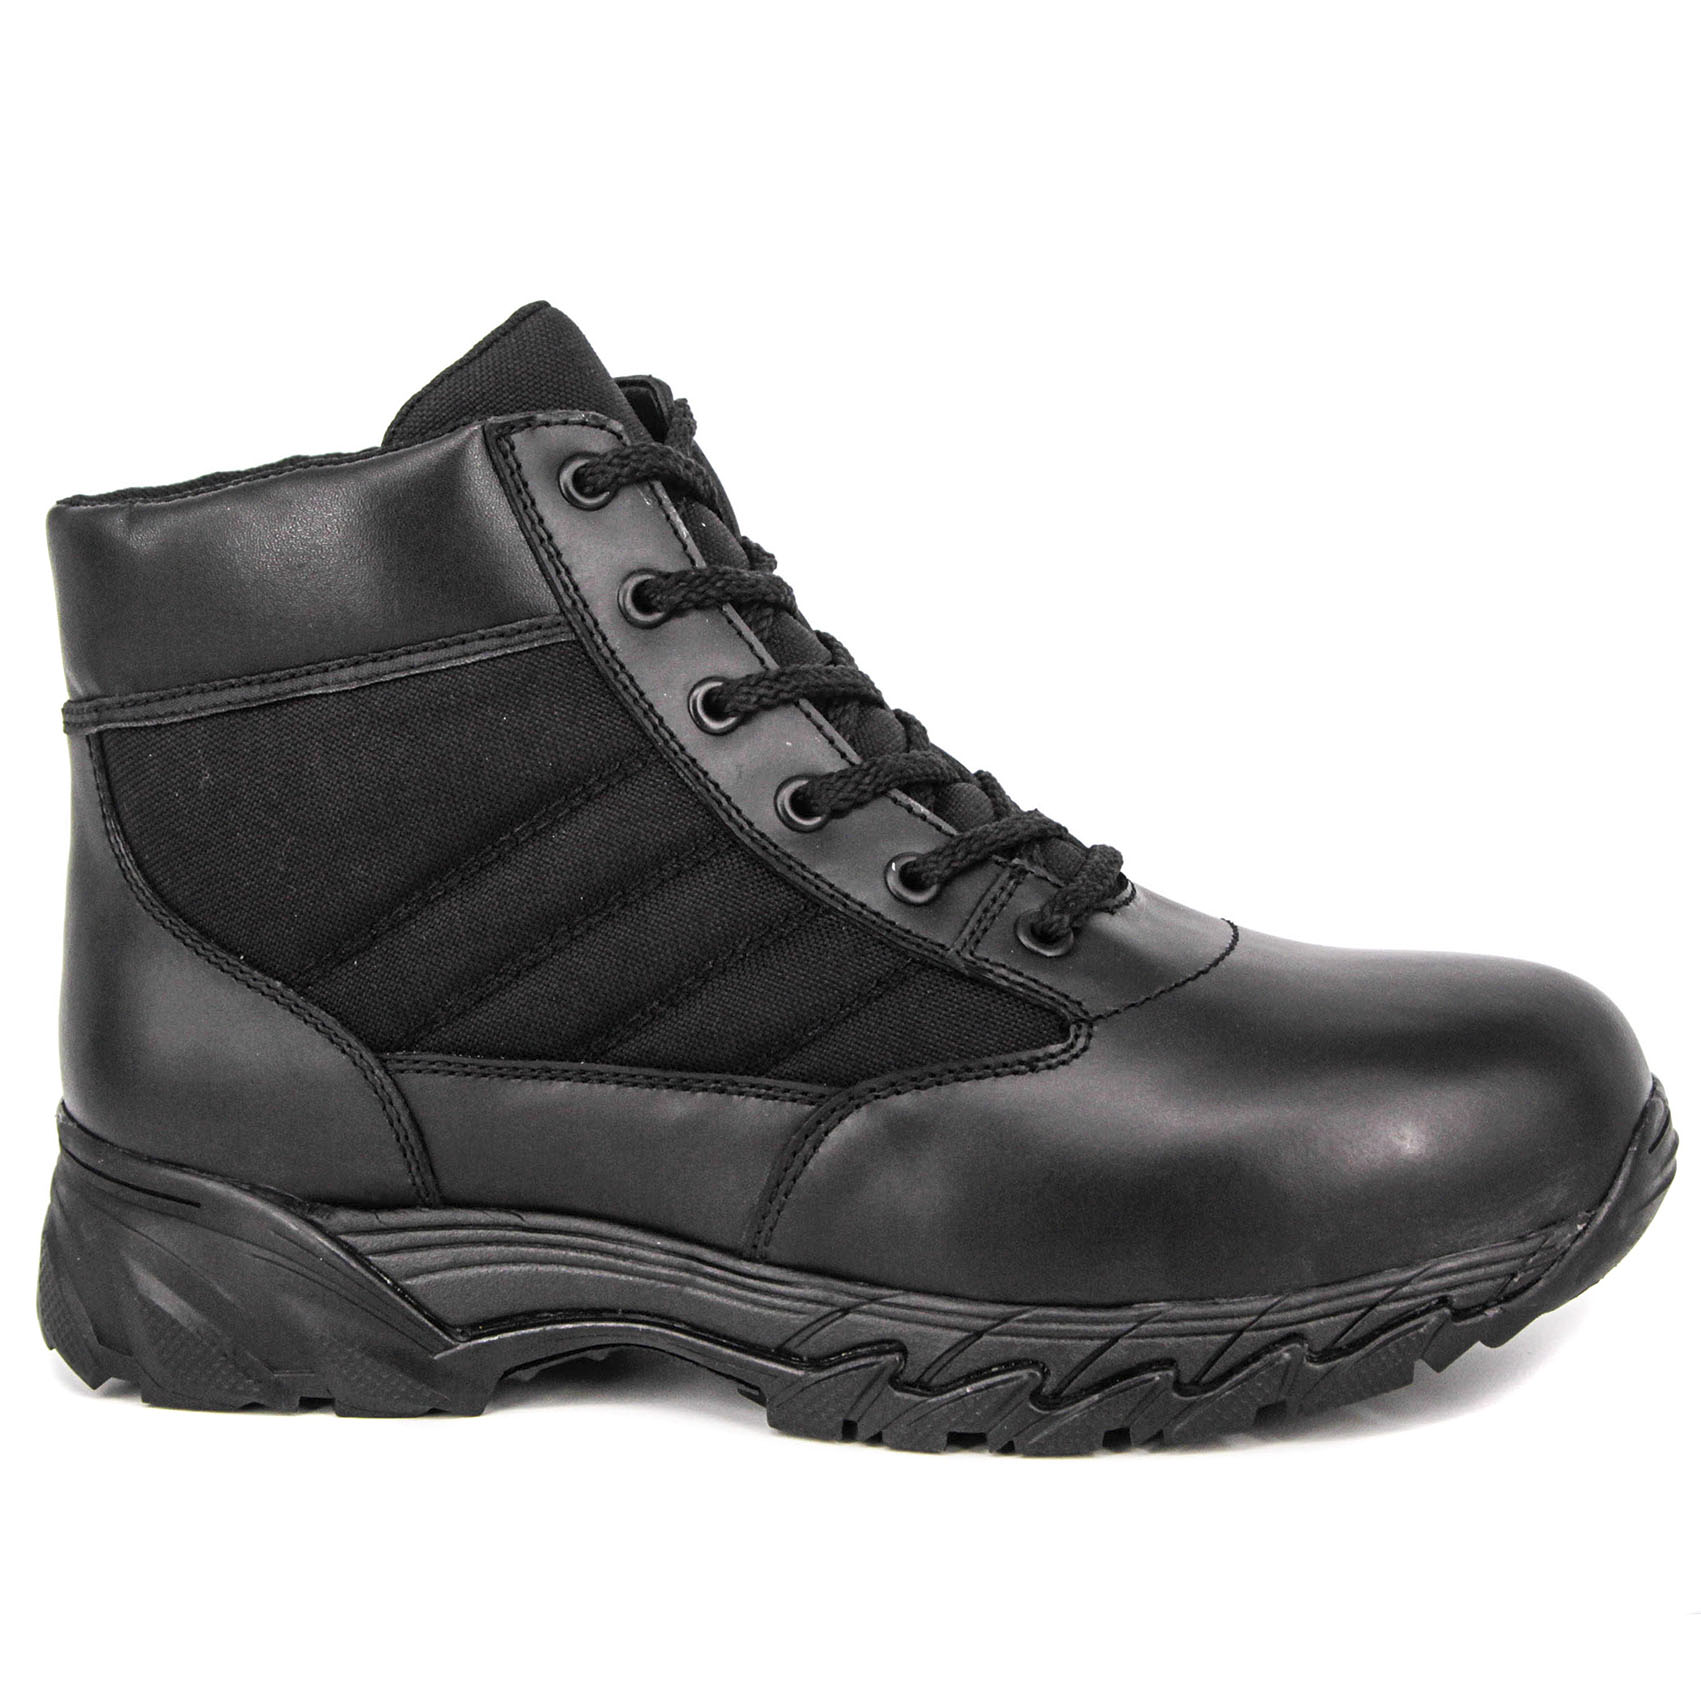 MILFORCE High quality nylon canvas military boots tactical combat boot